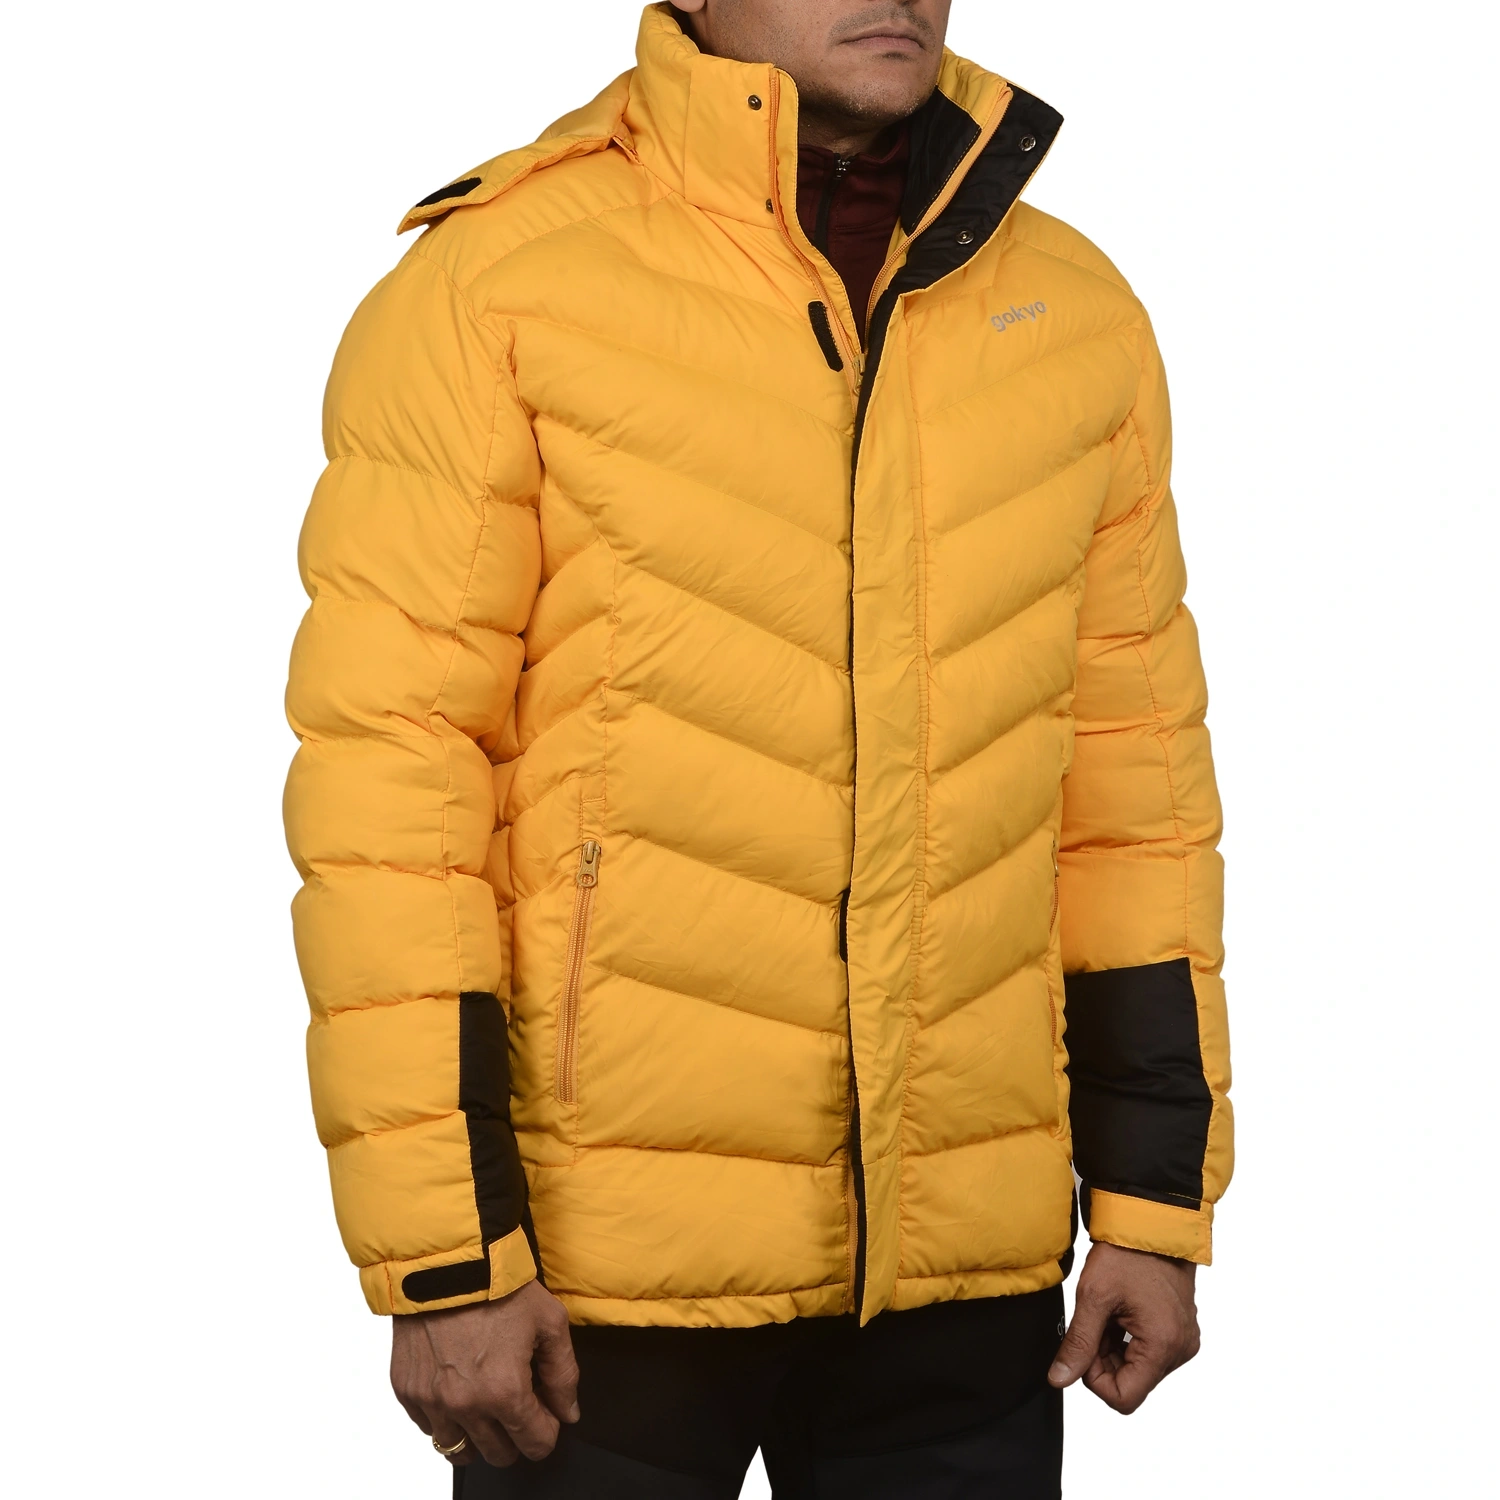 K2 Survivor Down Jacket for Men: Stylized Functionality for Extreme Cold Weather Expeditions (Up to -20°C)-3XL-Yellow-1